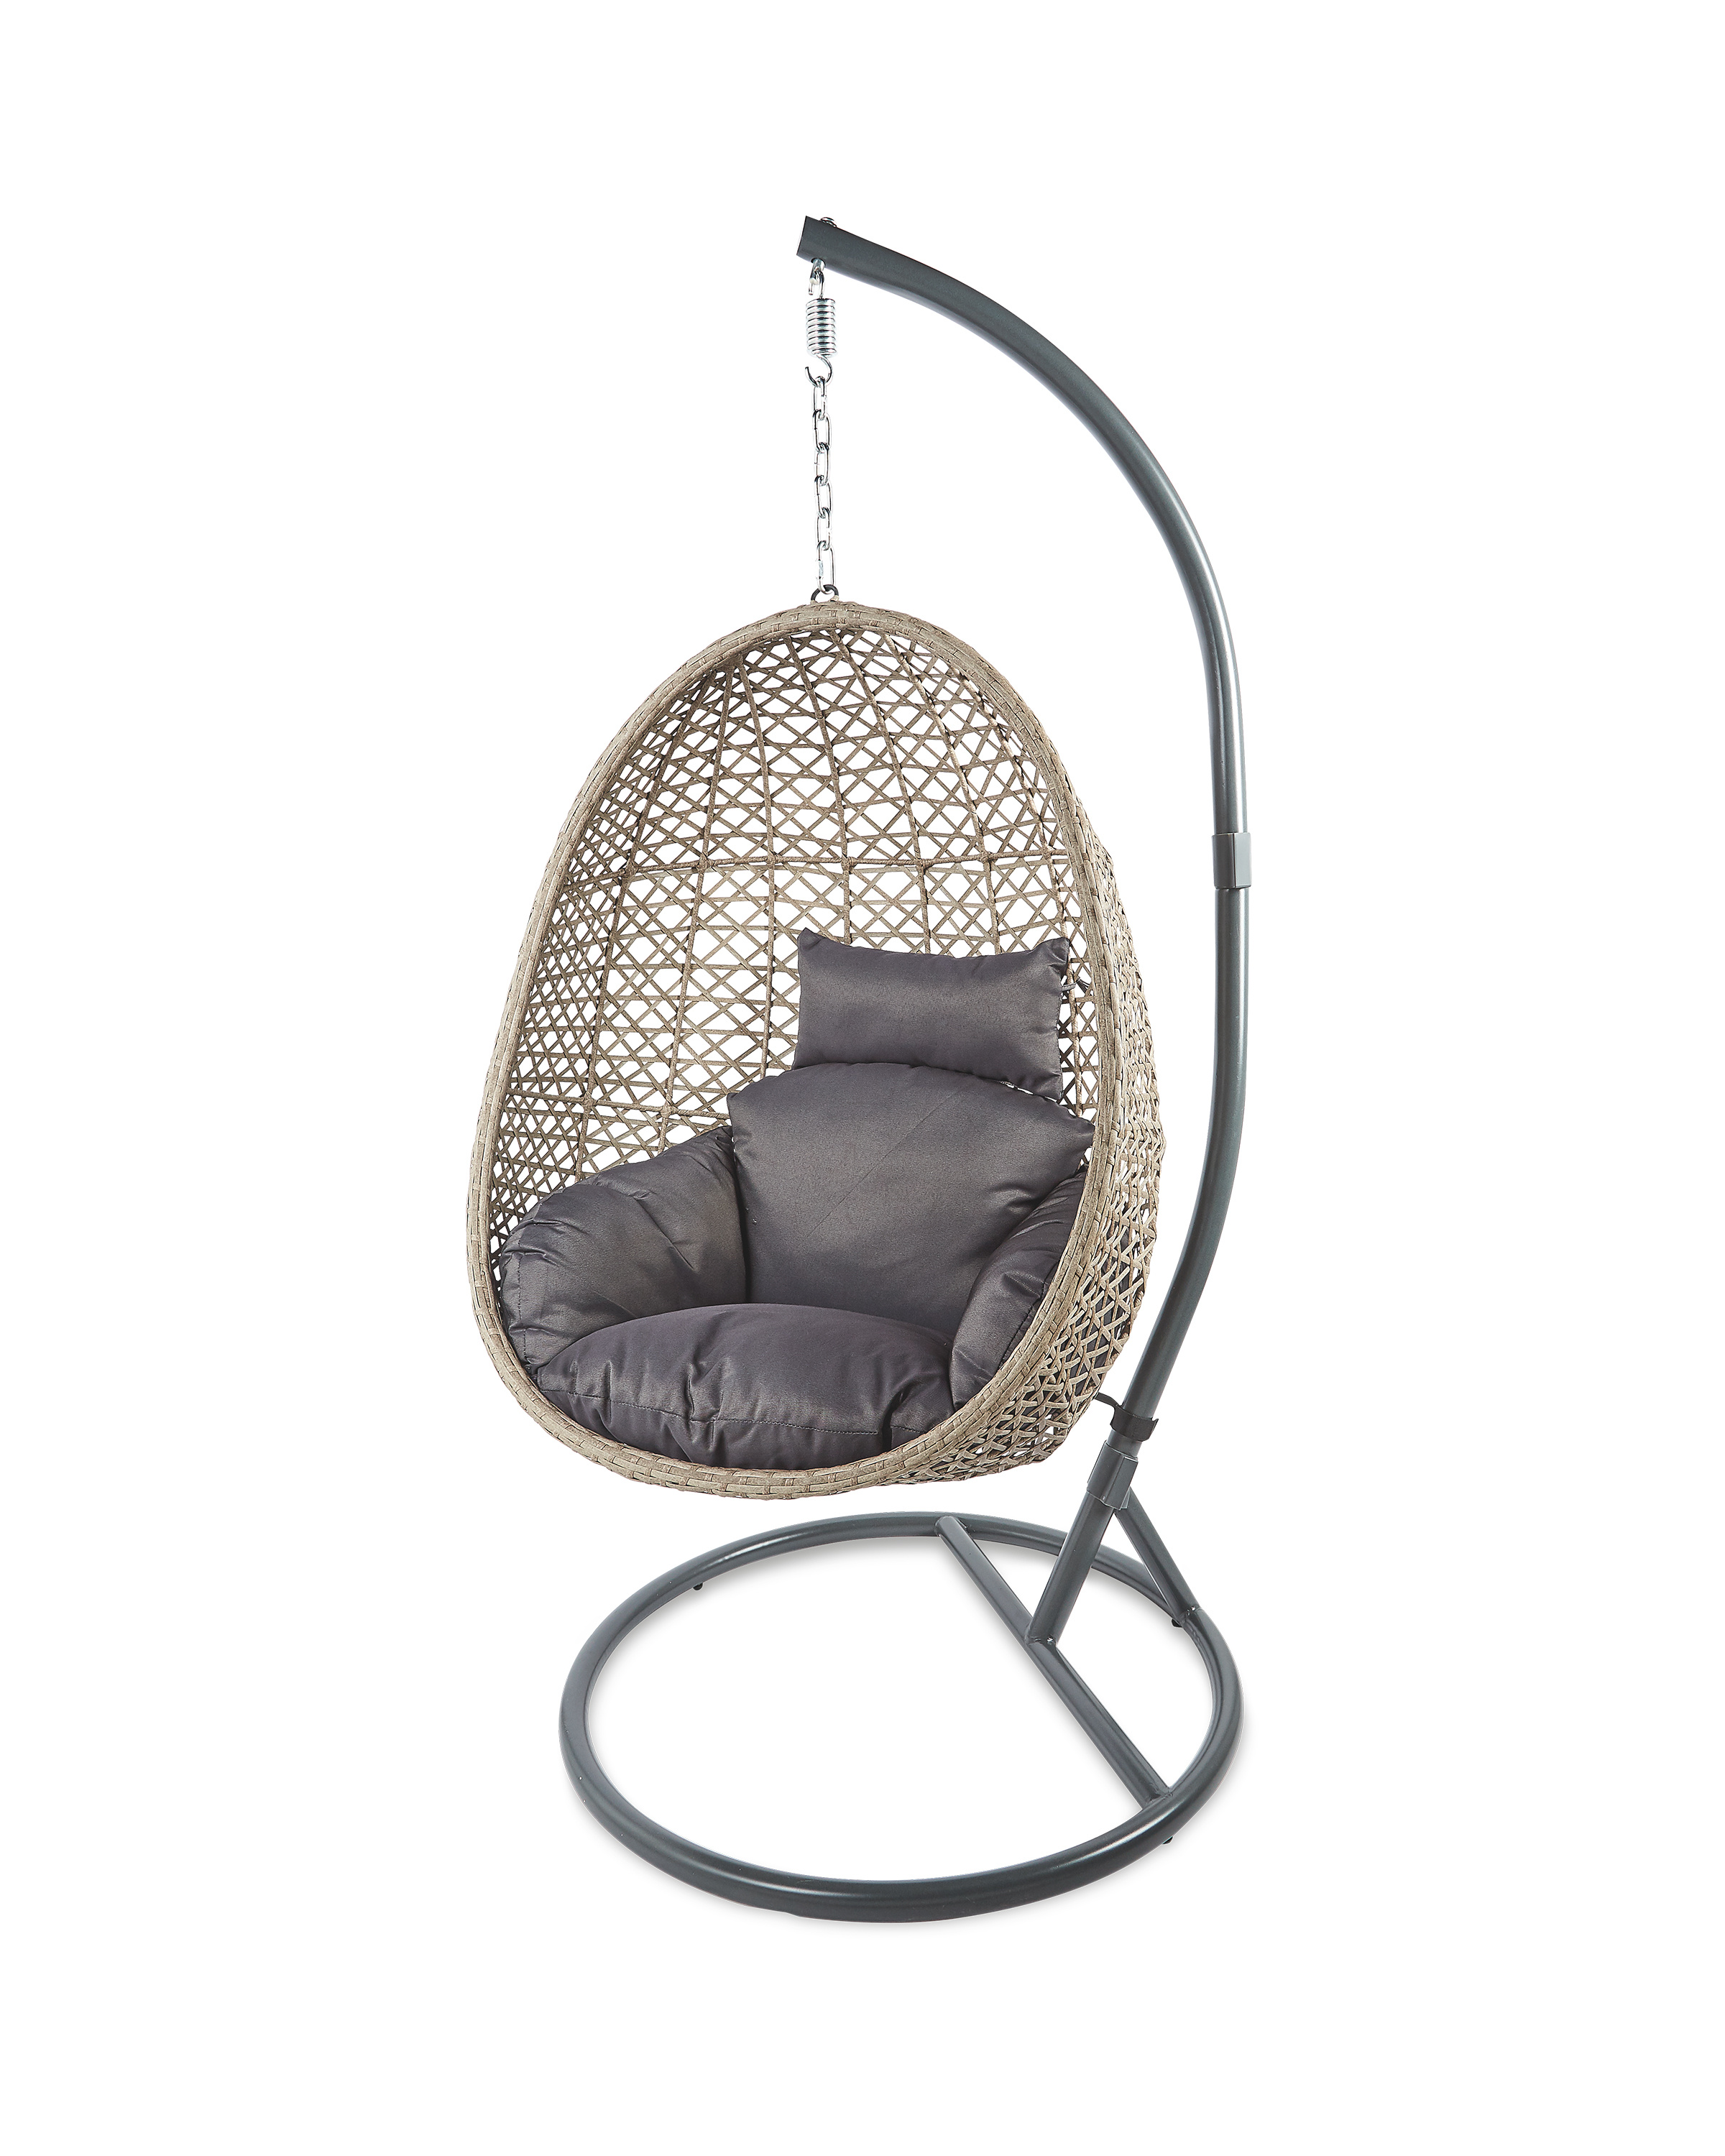 Gardenline Hanging Egg Chair Aldi Uk, Are Egg Chairs Safe For Cats